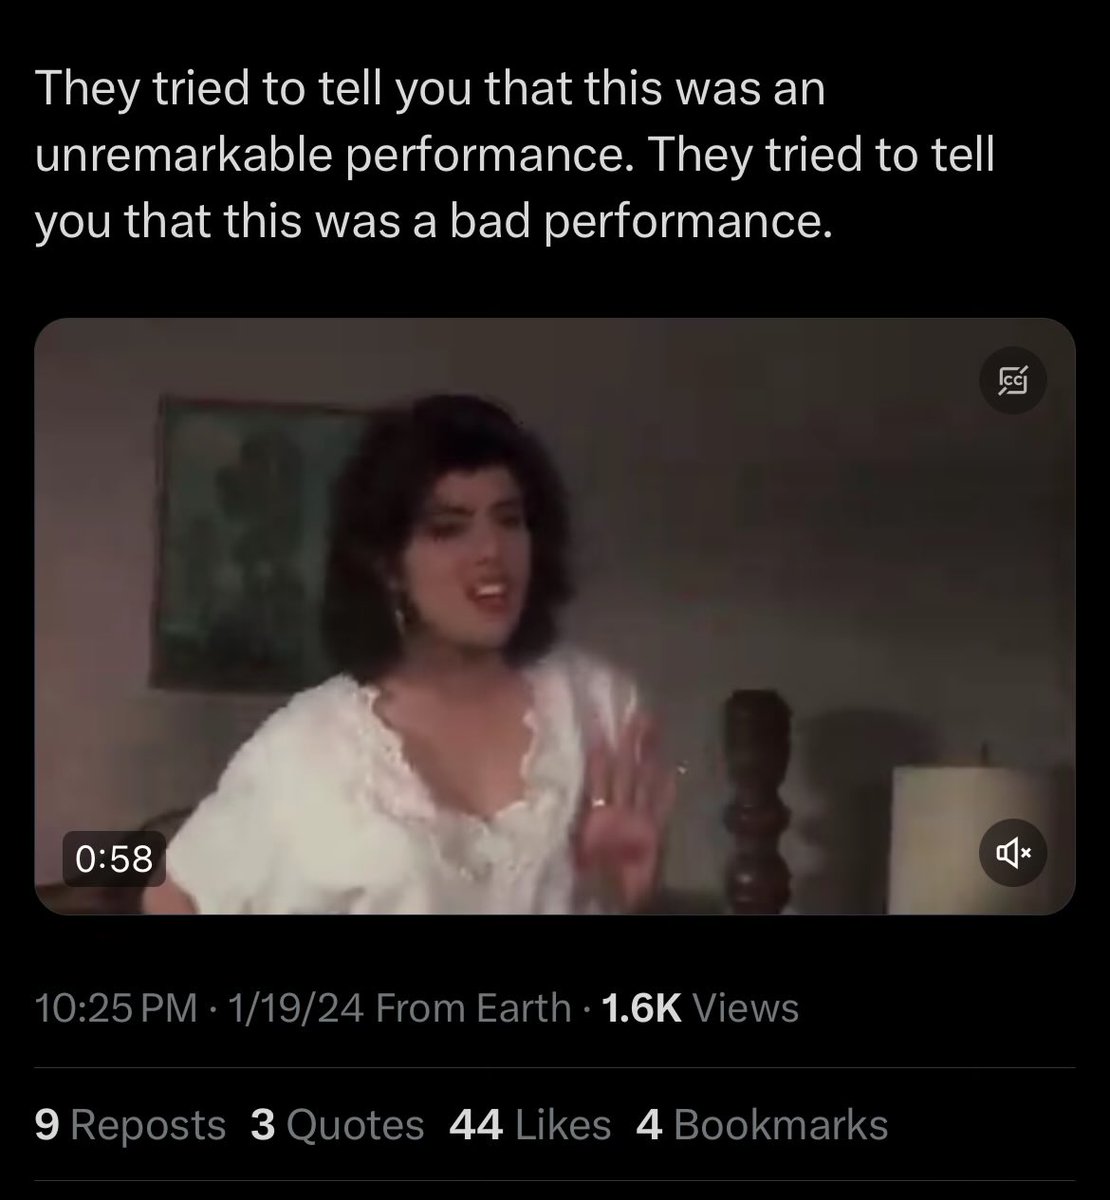 NO THEY DIDN’T!!! SHE WON AN OSCAR FOR IT!!! FOR 30 YEARS NOW ALL OF AMERICA HAS SAID “I LOVED HER IN MY COUSIN VINNY” WHEN THEY SEE MARISA TOMEI IN SOMETHING!!! I FEEL LIKE I’M TAKING CRAZY PILLS!!!!!